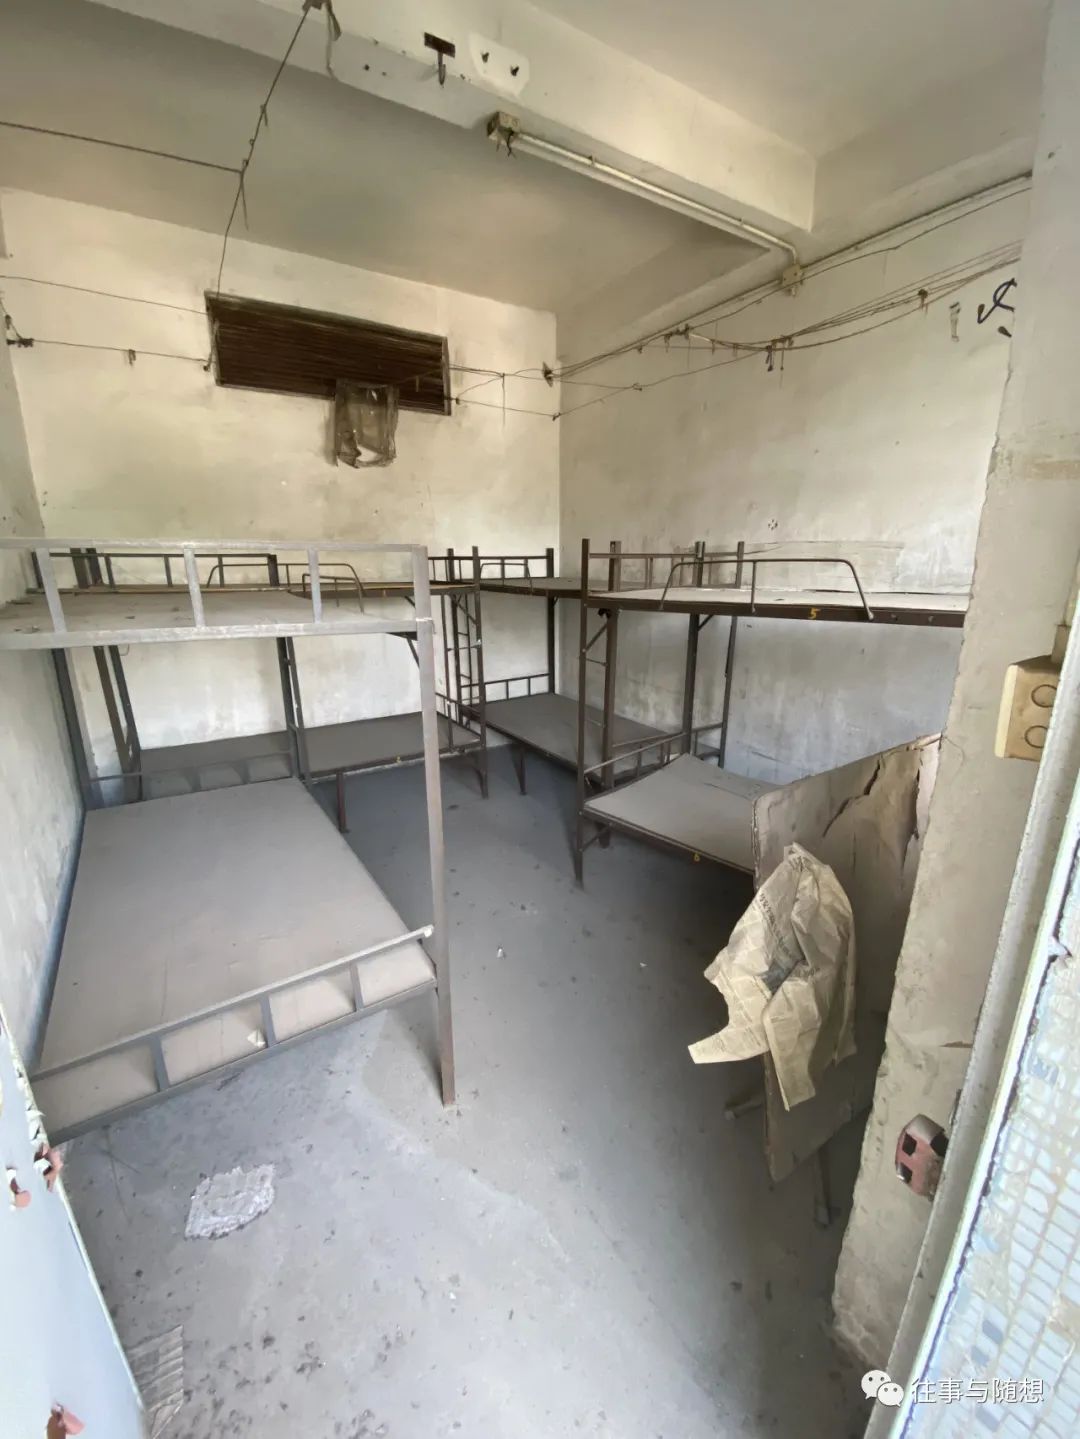 An abandoned dormitory room with four metal bunk beds, concrete walls and concrete floors.